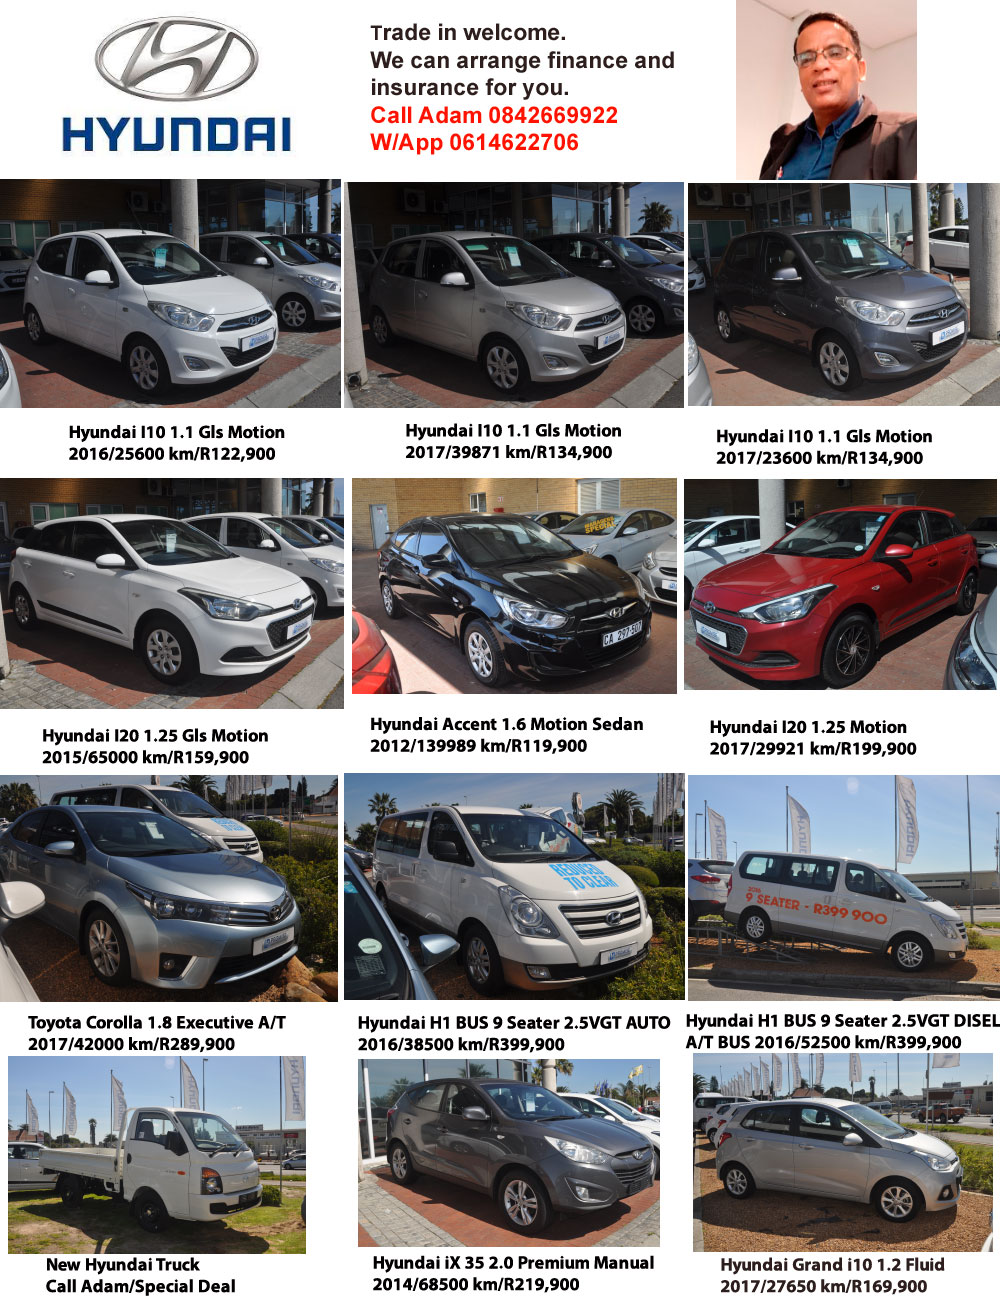 Used and new Hyundai Gumtree Used Vehicles for Sale Cars & OLX cars and bakkies in Cape Town